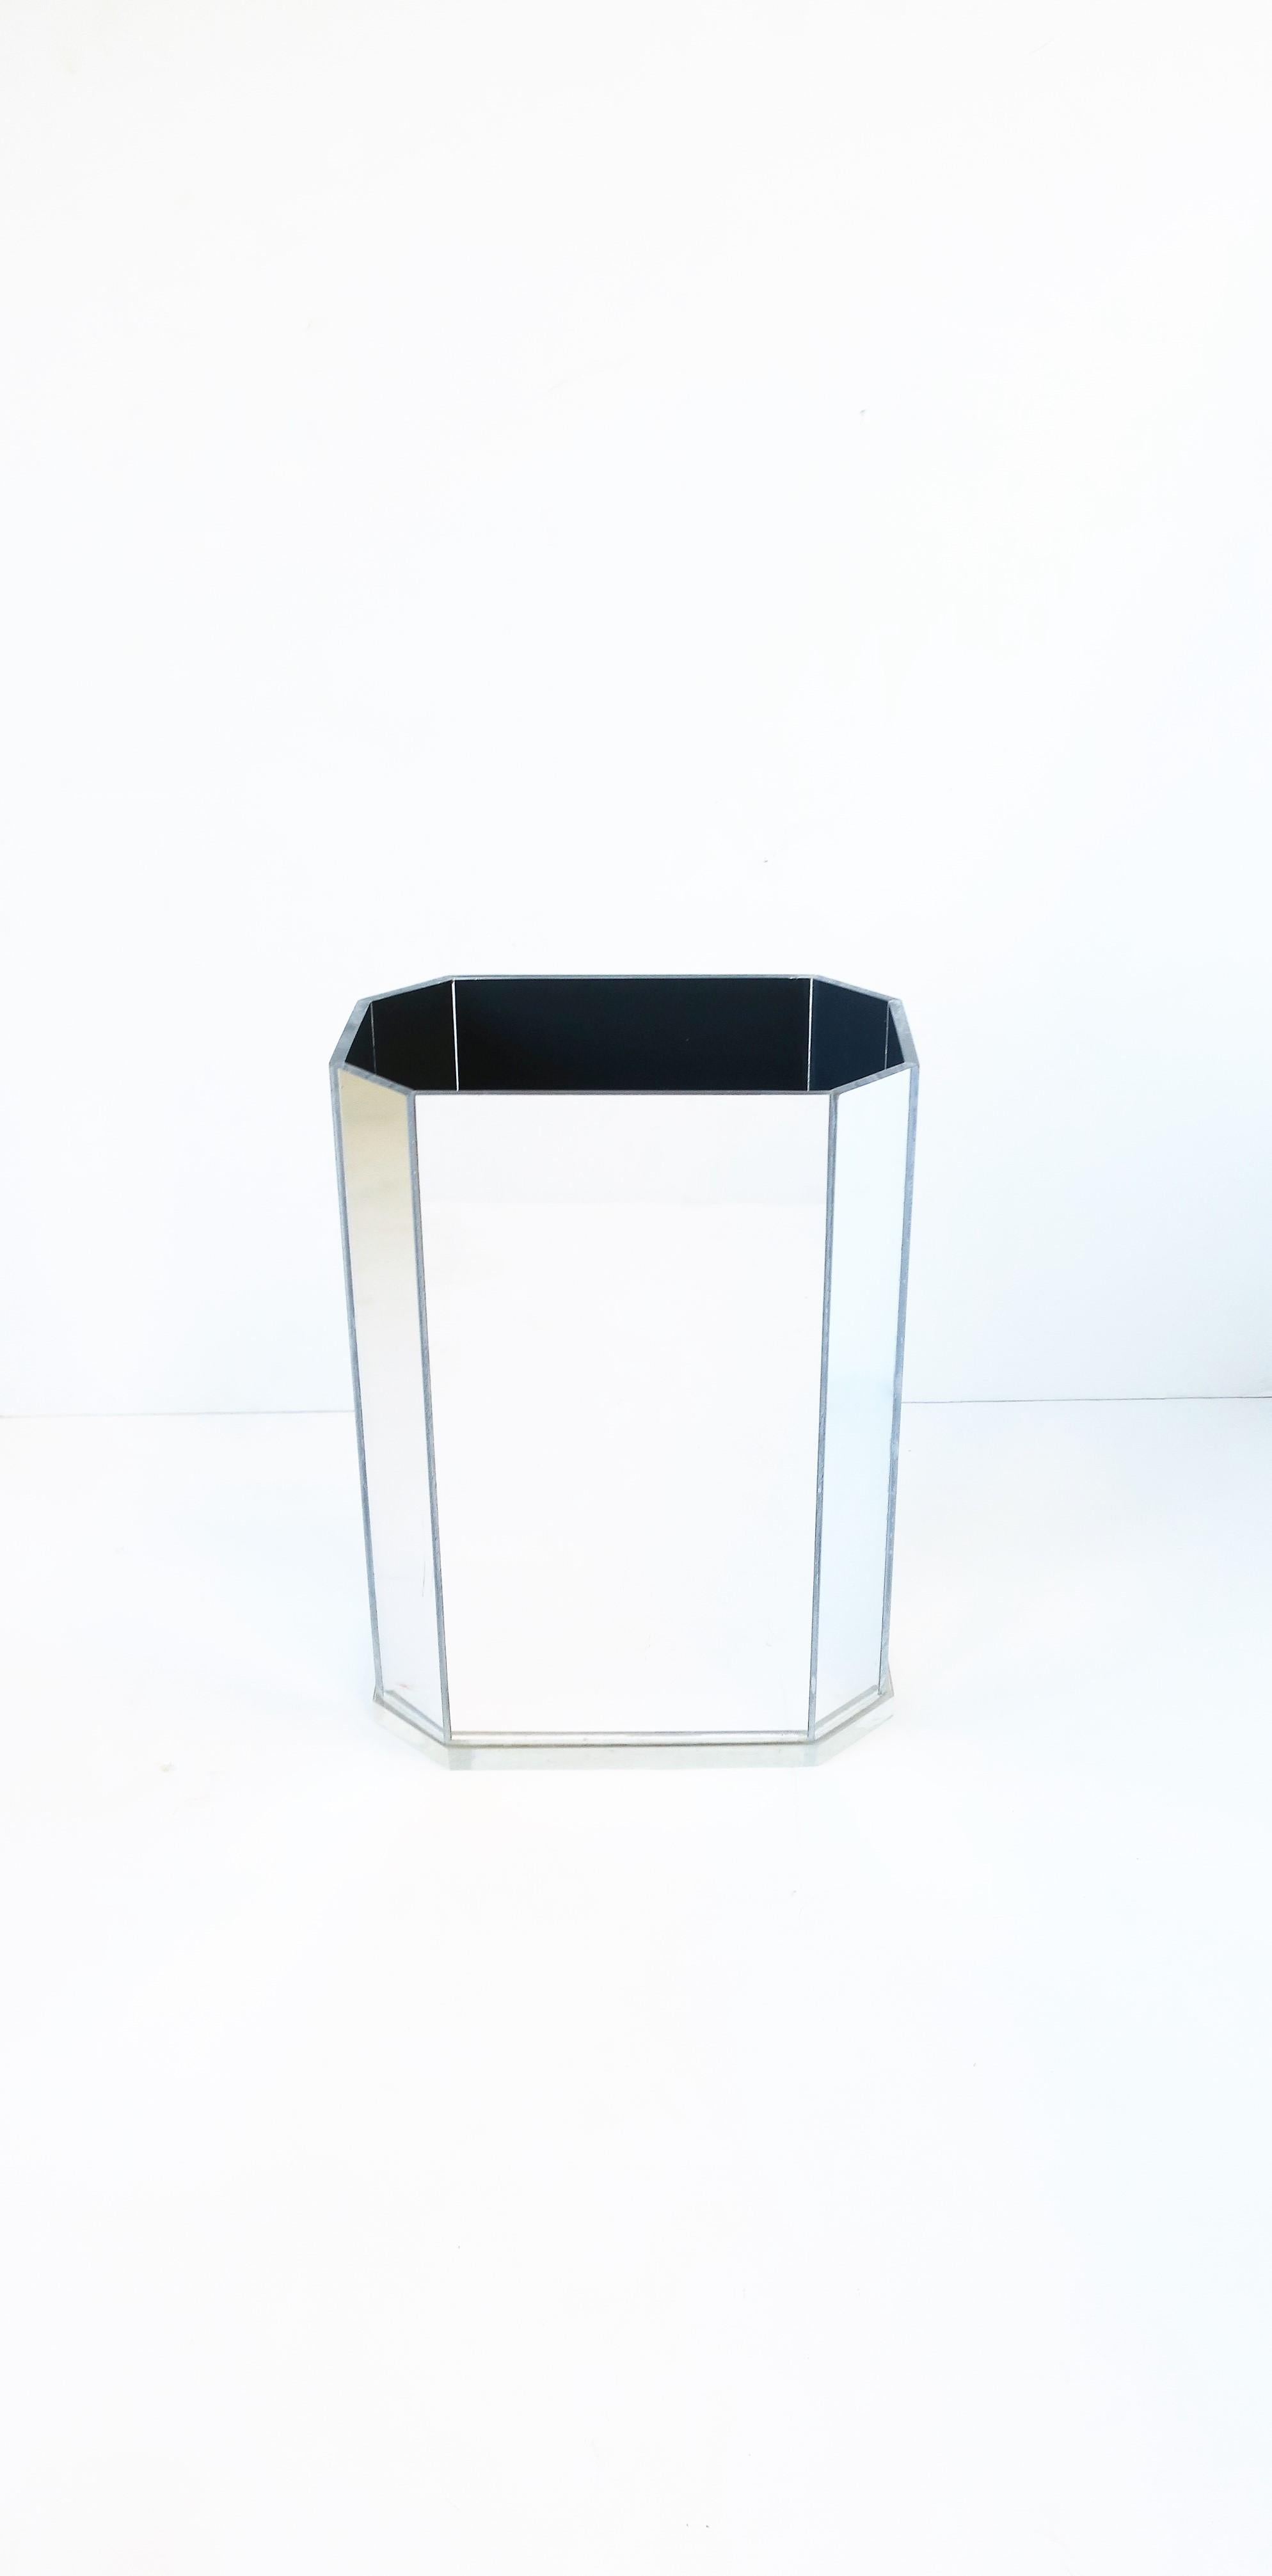 A 1970s modern octagonal rectangle mirrored acrylic wastebasket (waste basket) or trash can, circa 1970s, late 20th century. A great addition is any office, home office, desk, walk-in closet, bathroom vanity area, etc. Dimensions: 6.25